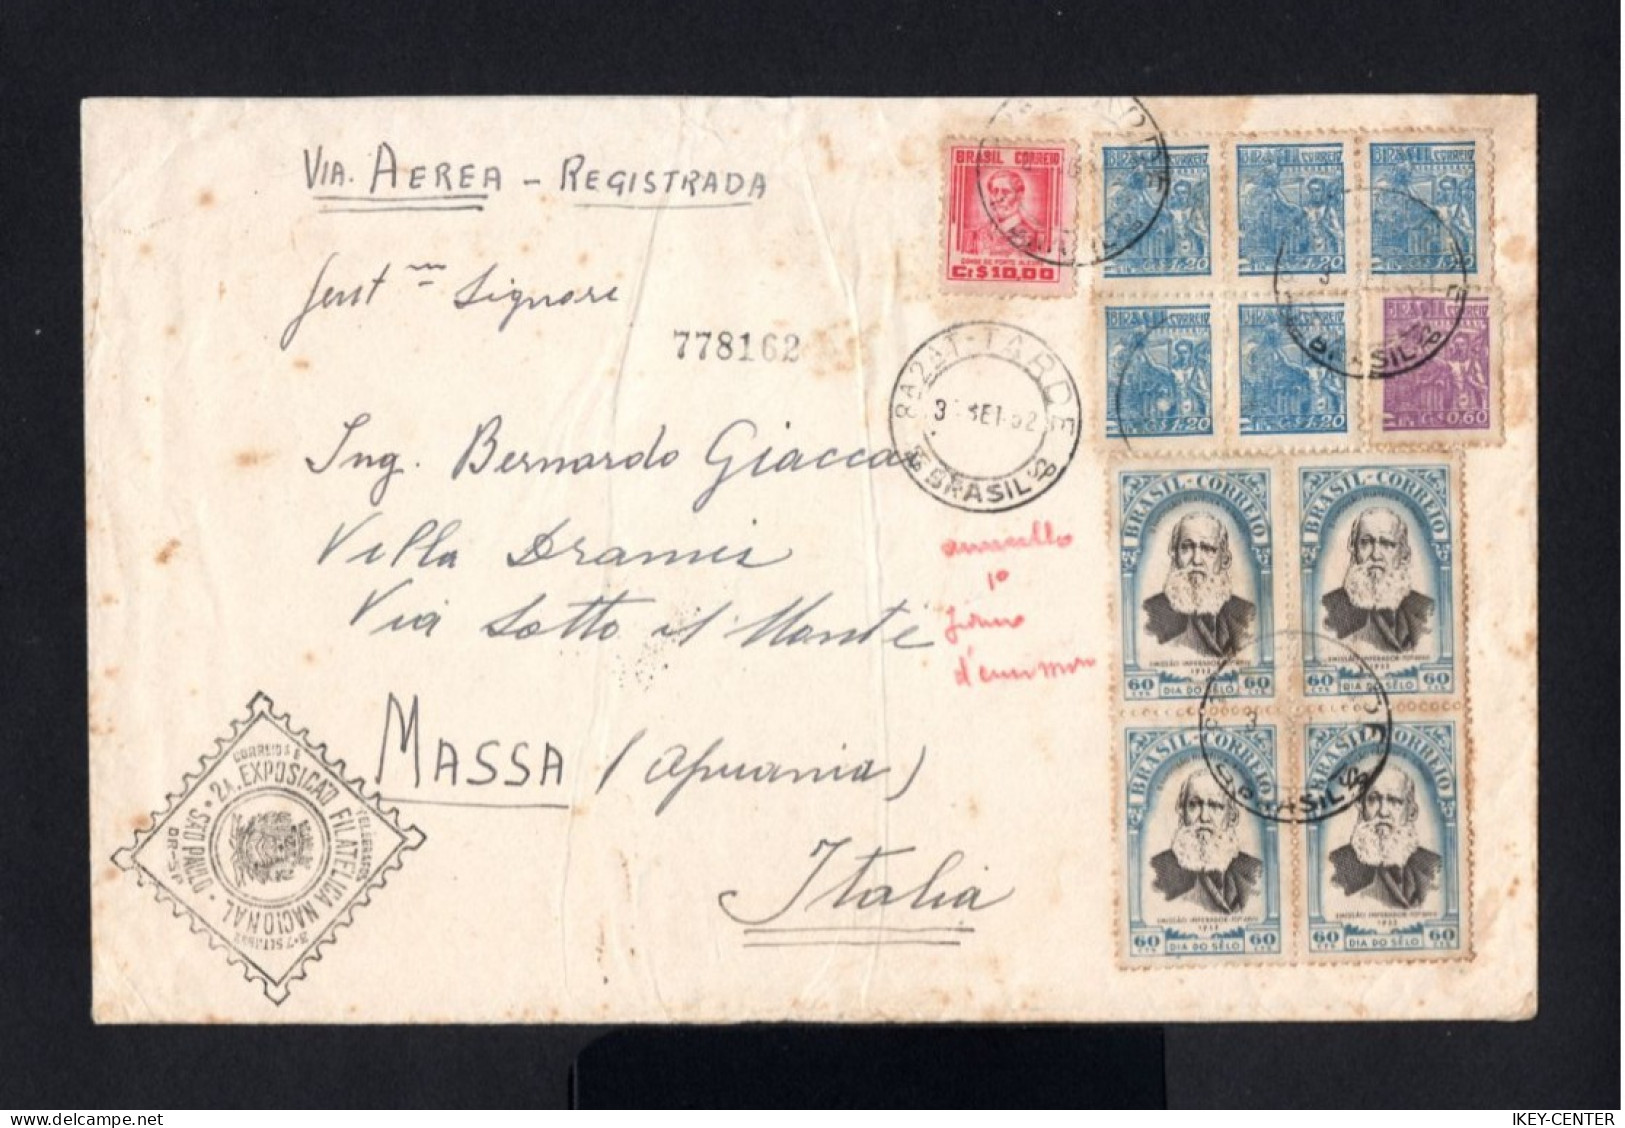 S710-BRAZIL-AIRMAIL REGISTERED COVER SAO PAULO To MASSA (italy).1952.ENVELOPPE AERIEN Recommande BRESIL - Covers & Documents